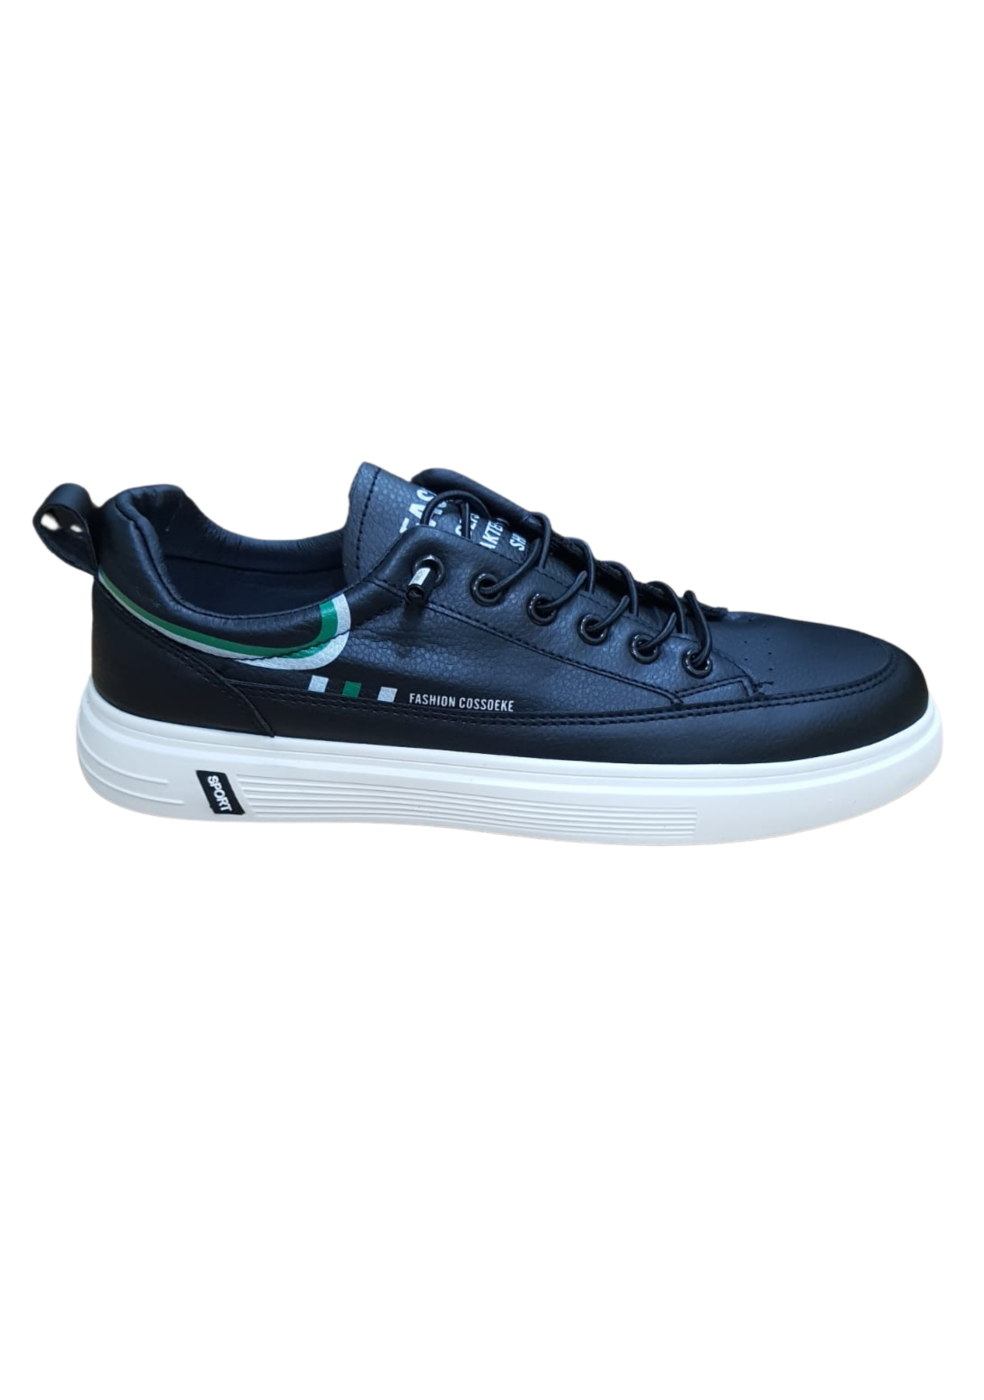 XSTOM Stylish Sneakers Shoes For Men